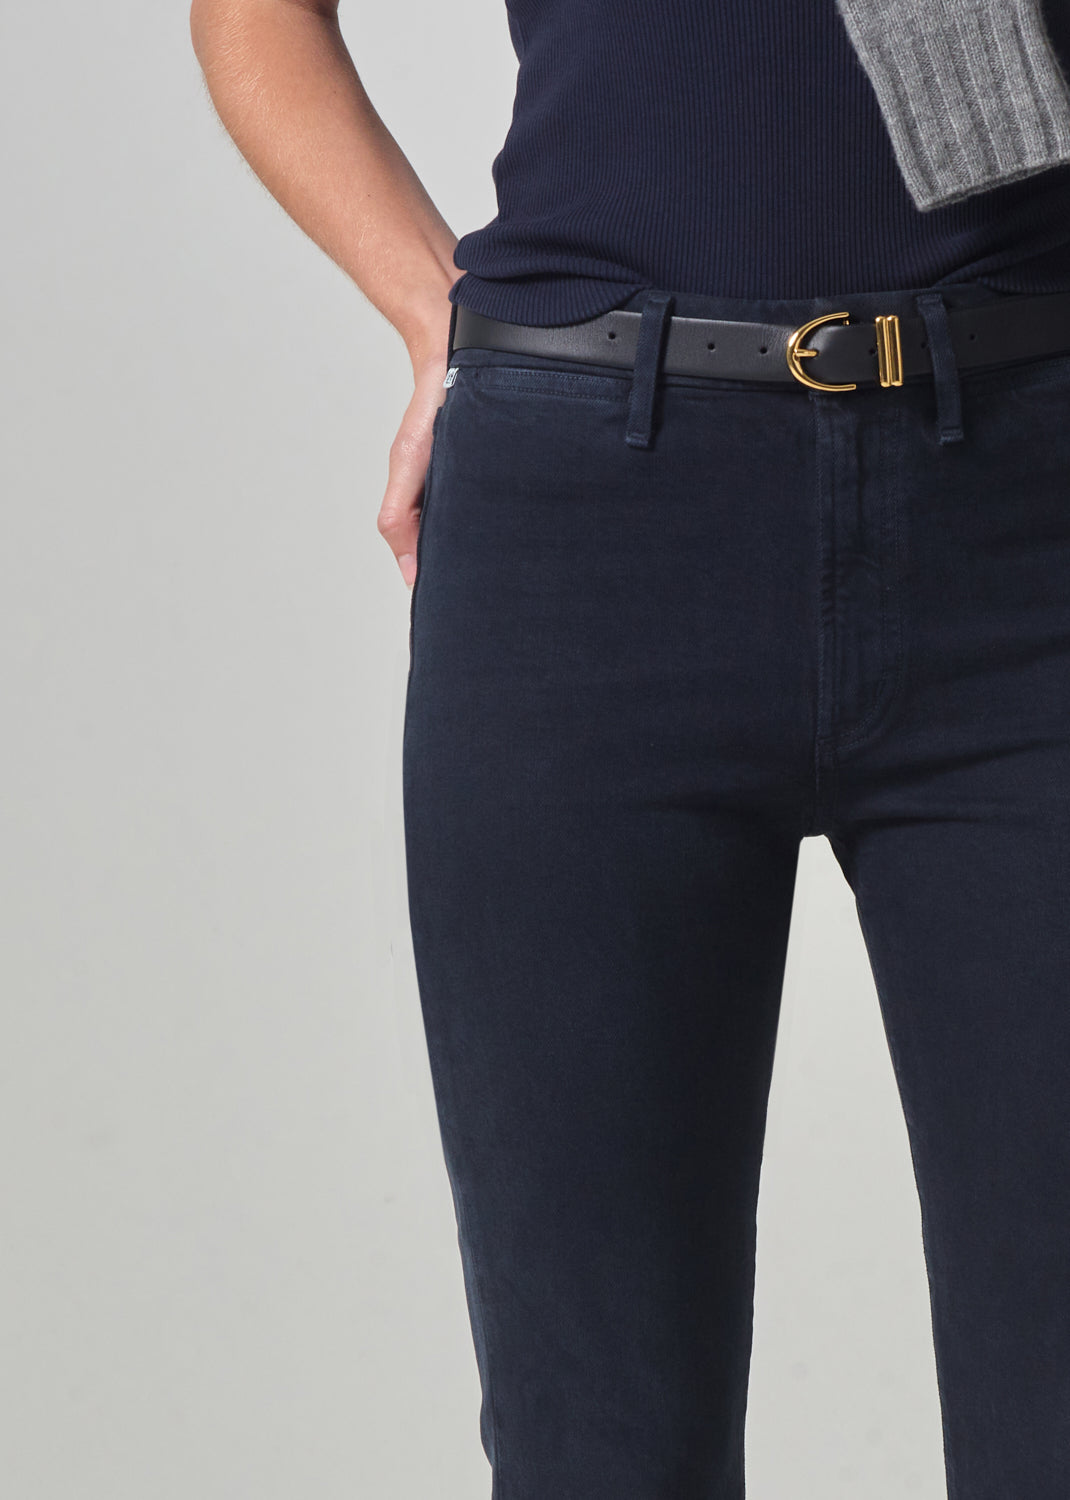 Isola Cropped Trouser in Navy